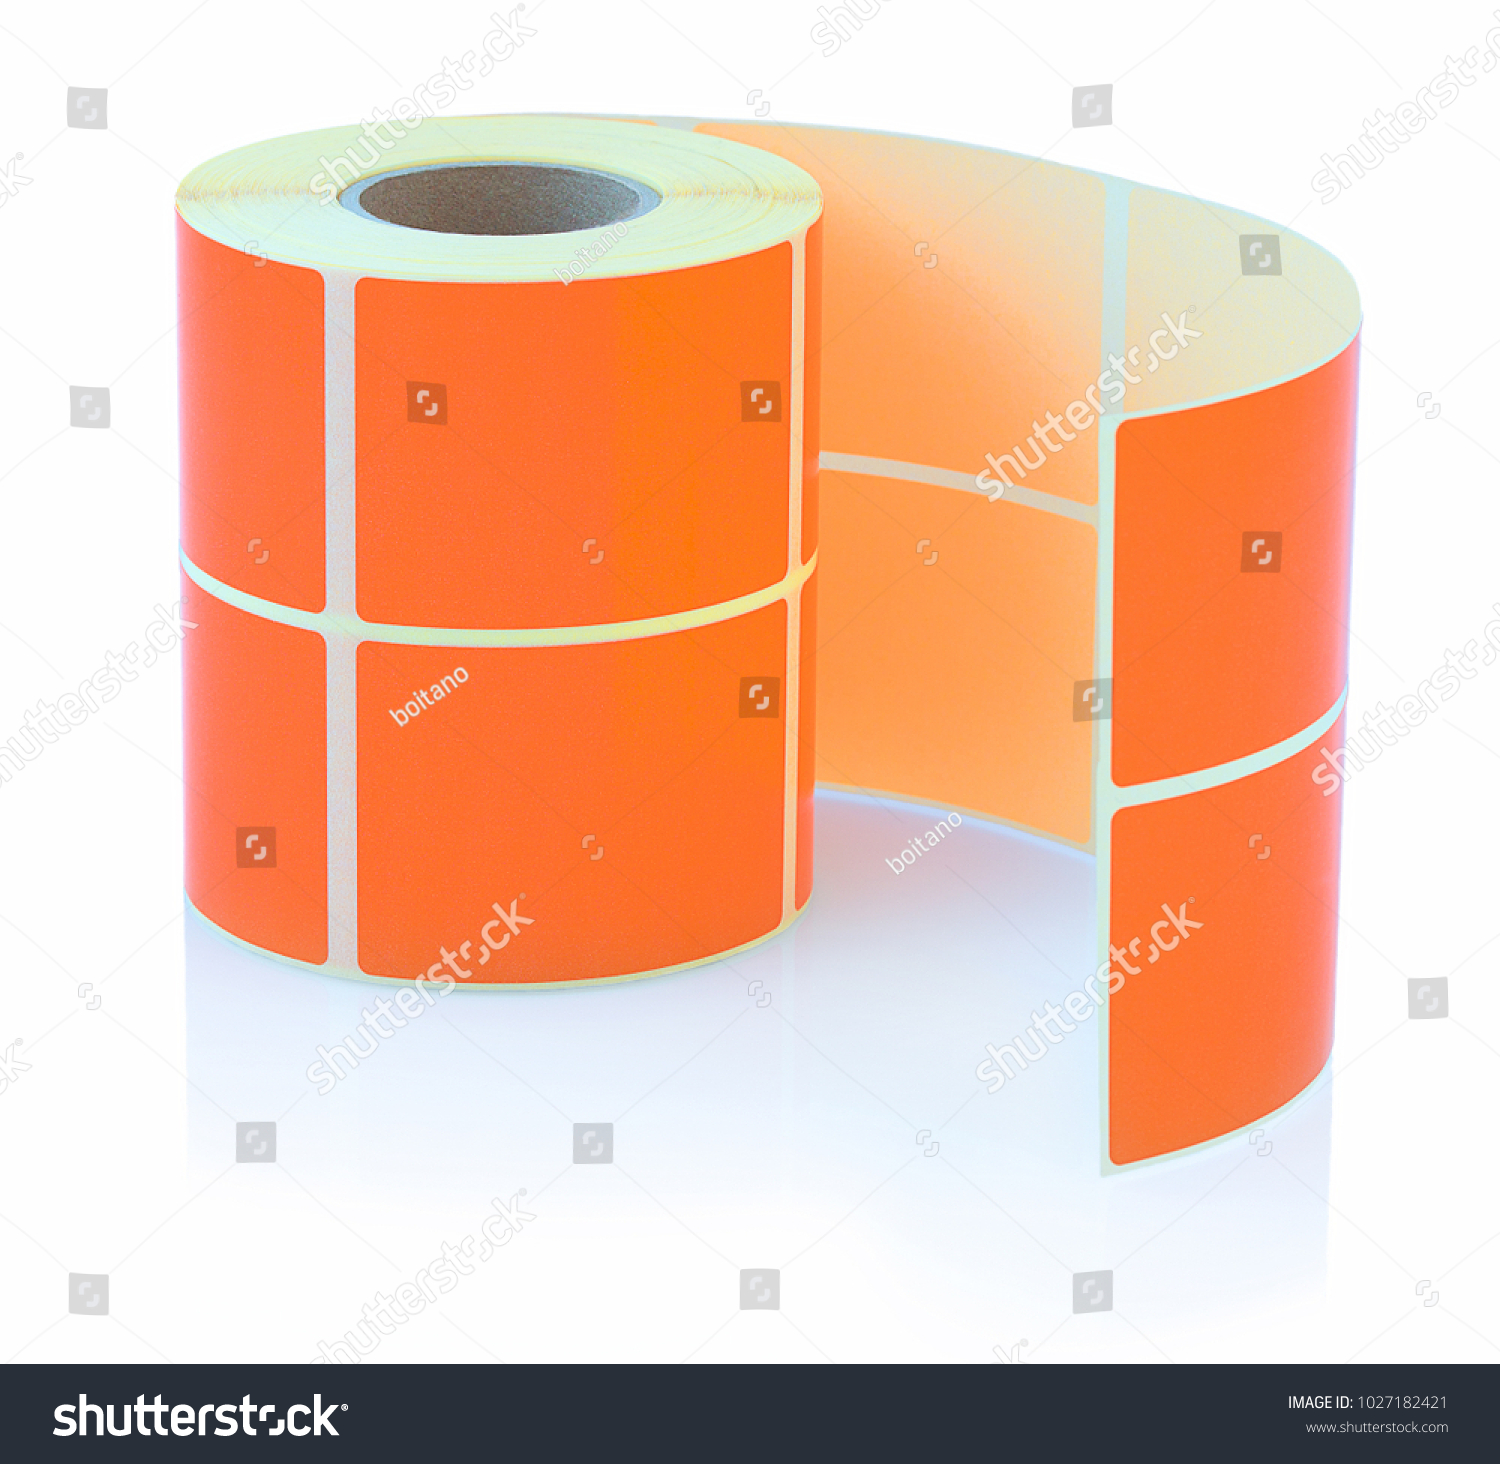 Orange label roll isolated on white background with shadow reflection. Color reel of labels for printers. Labels for direct thermal or thermal transfer printing. #1027182421